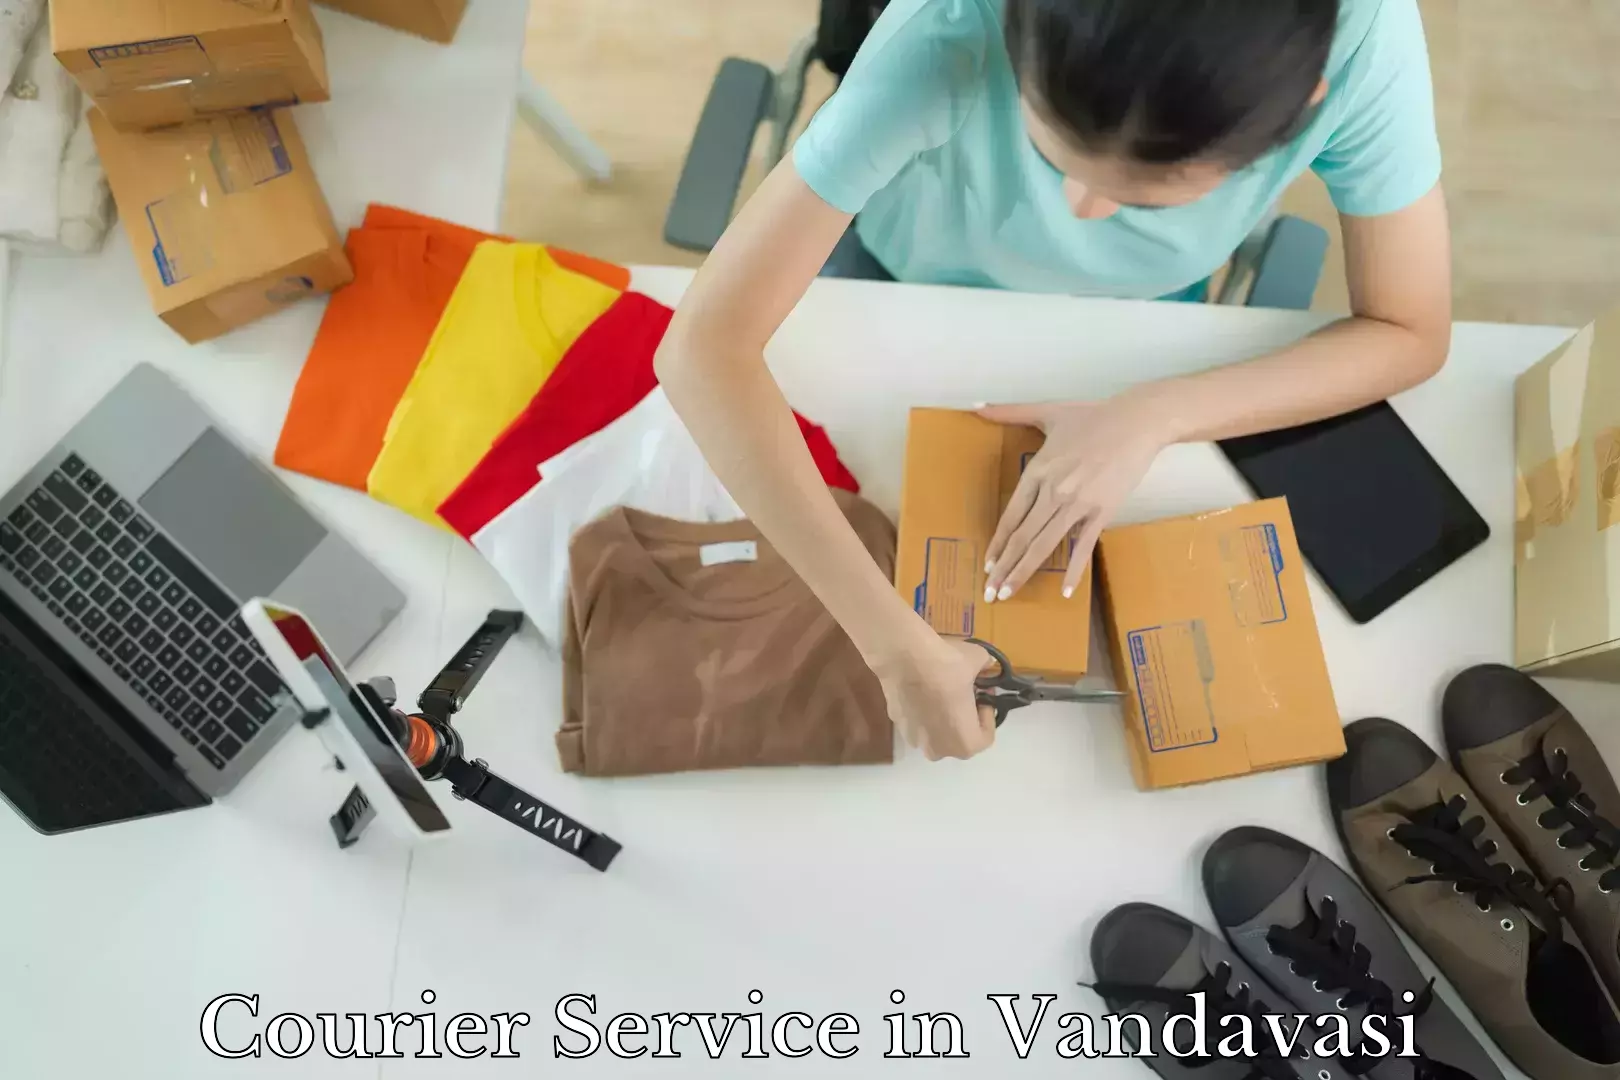 Overnight delivery services in Vandavasi